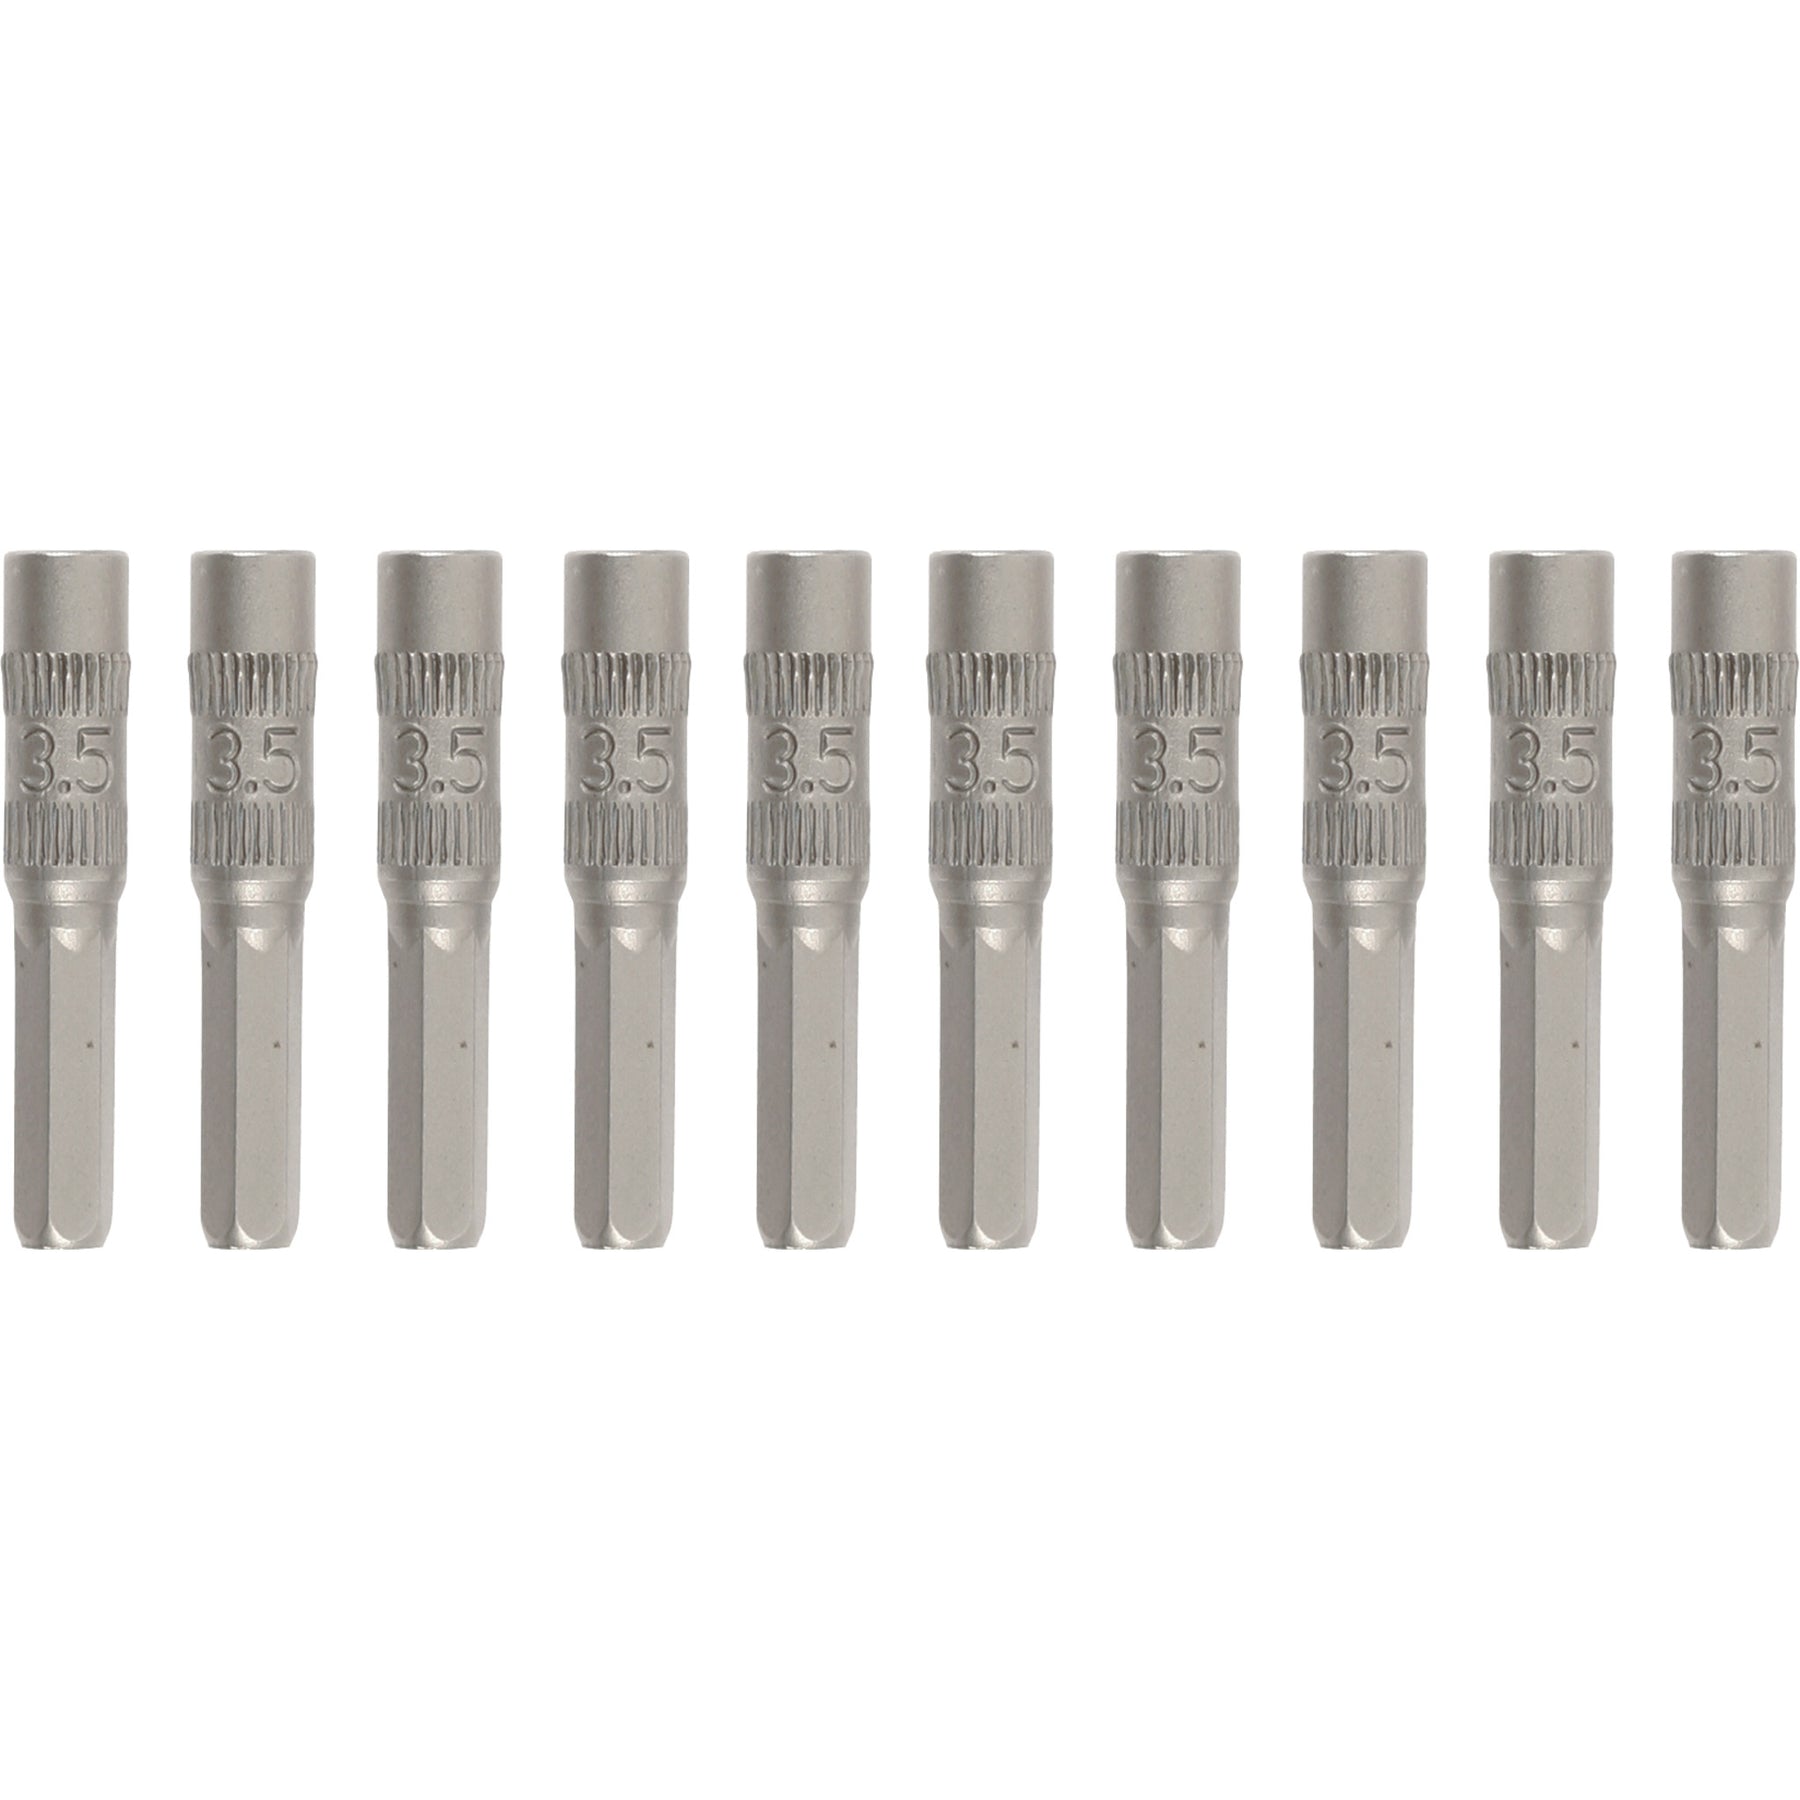 System 4 Nut Setters 4mm 9/64" x 30mm - 10 Pack